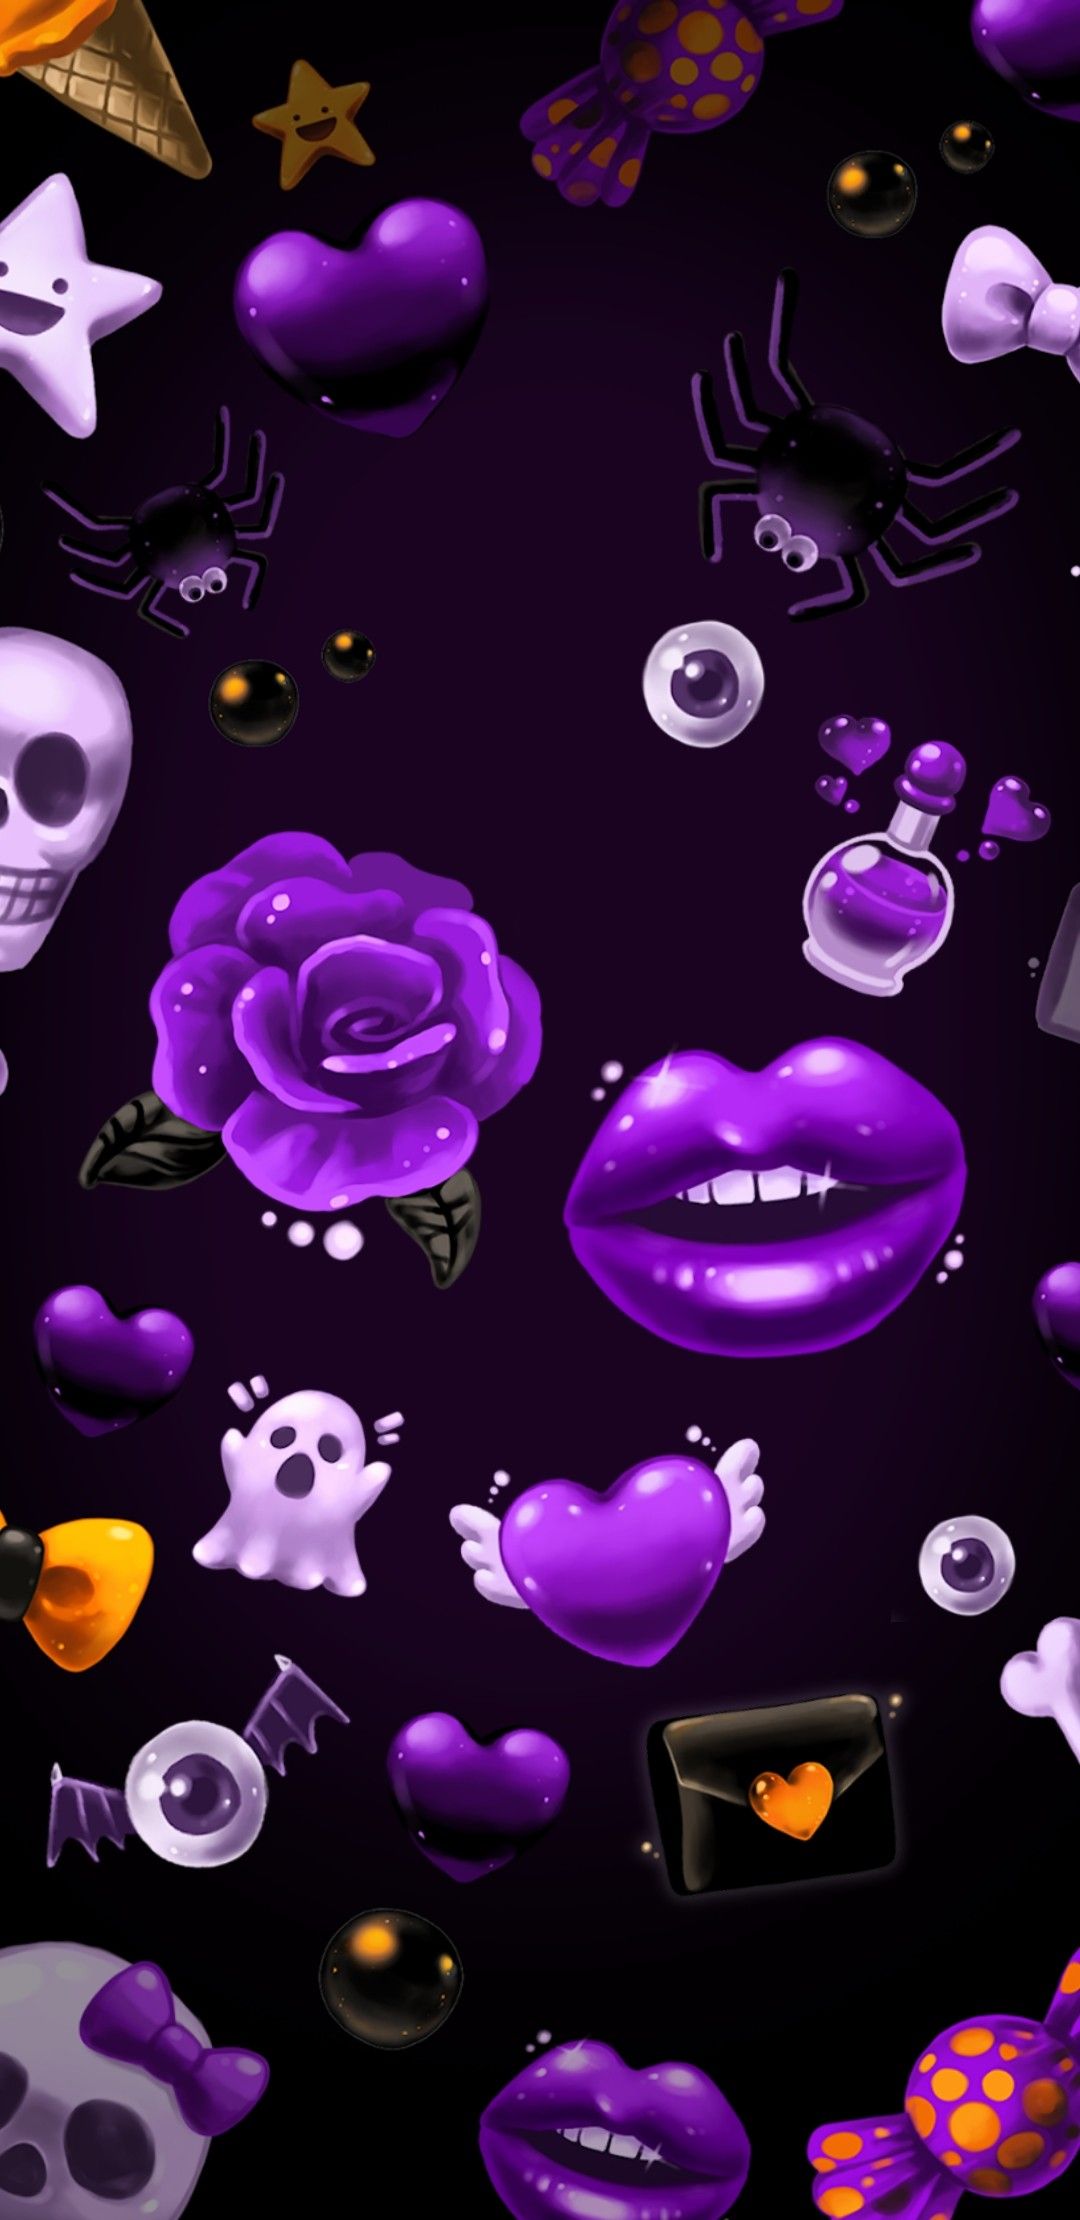 Scary Halloween Wallpaper HD 68 images